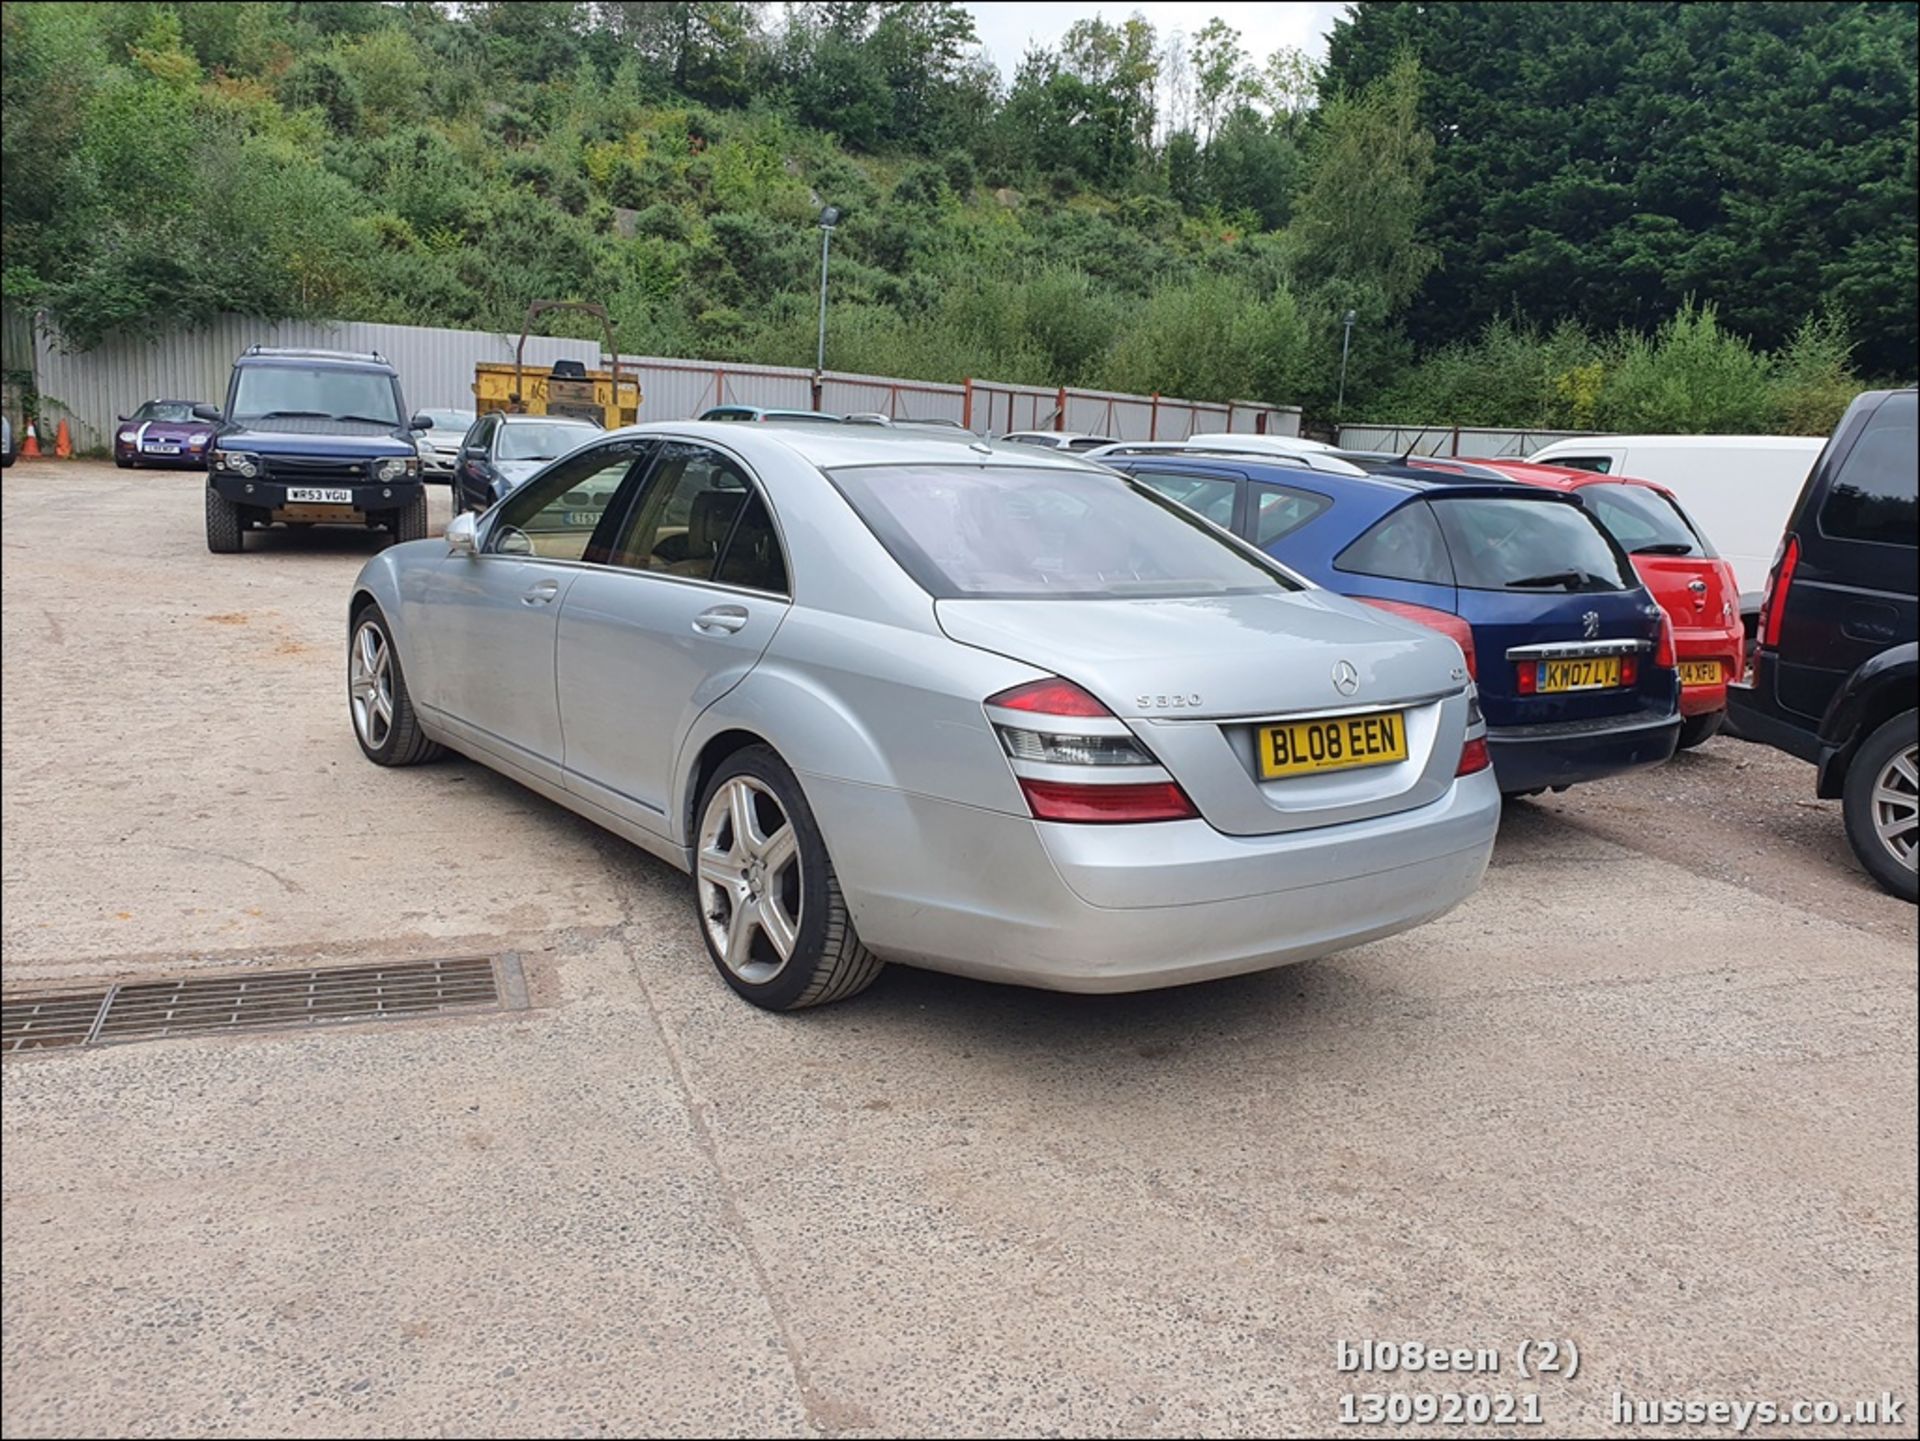 08/08 MERCEDES S320 CDI AUTO - 2987cc 4dr Saloon (Silver, 205k) - Image 2 of 16